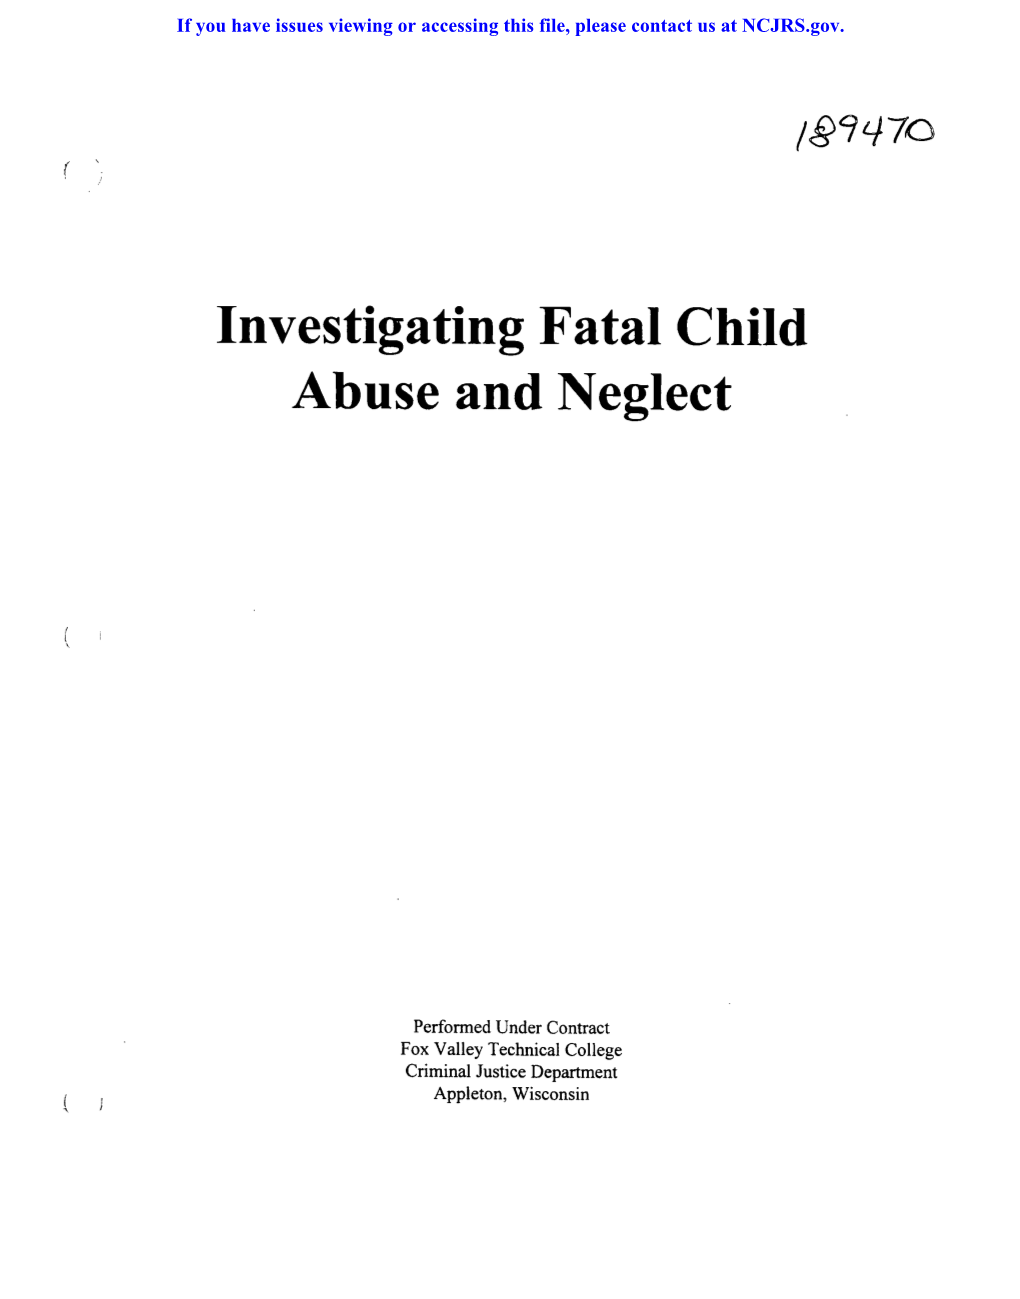 Investigating Fatal Child Abuse and Neglect